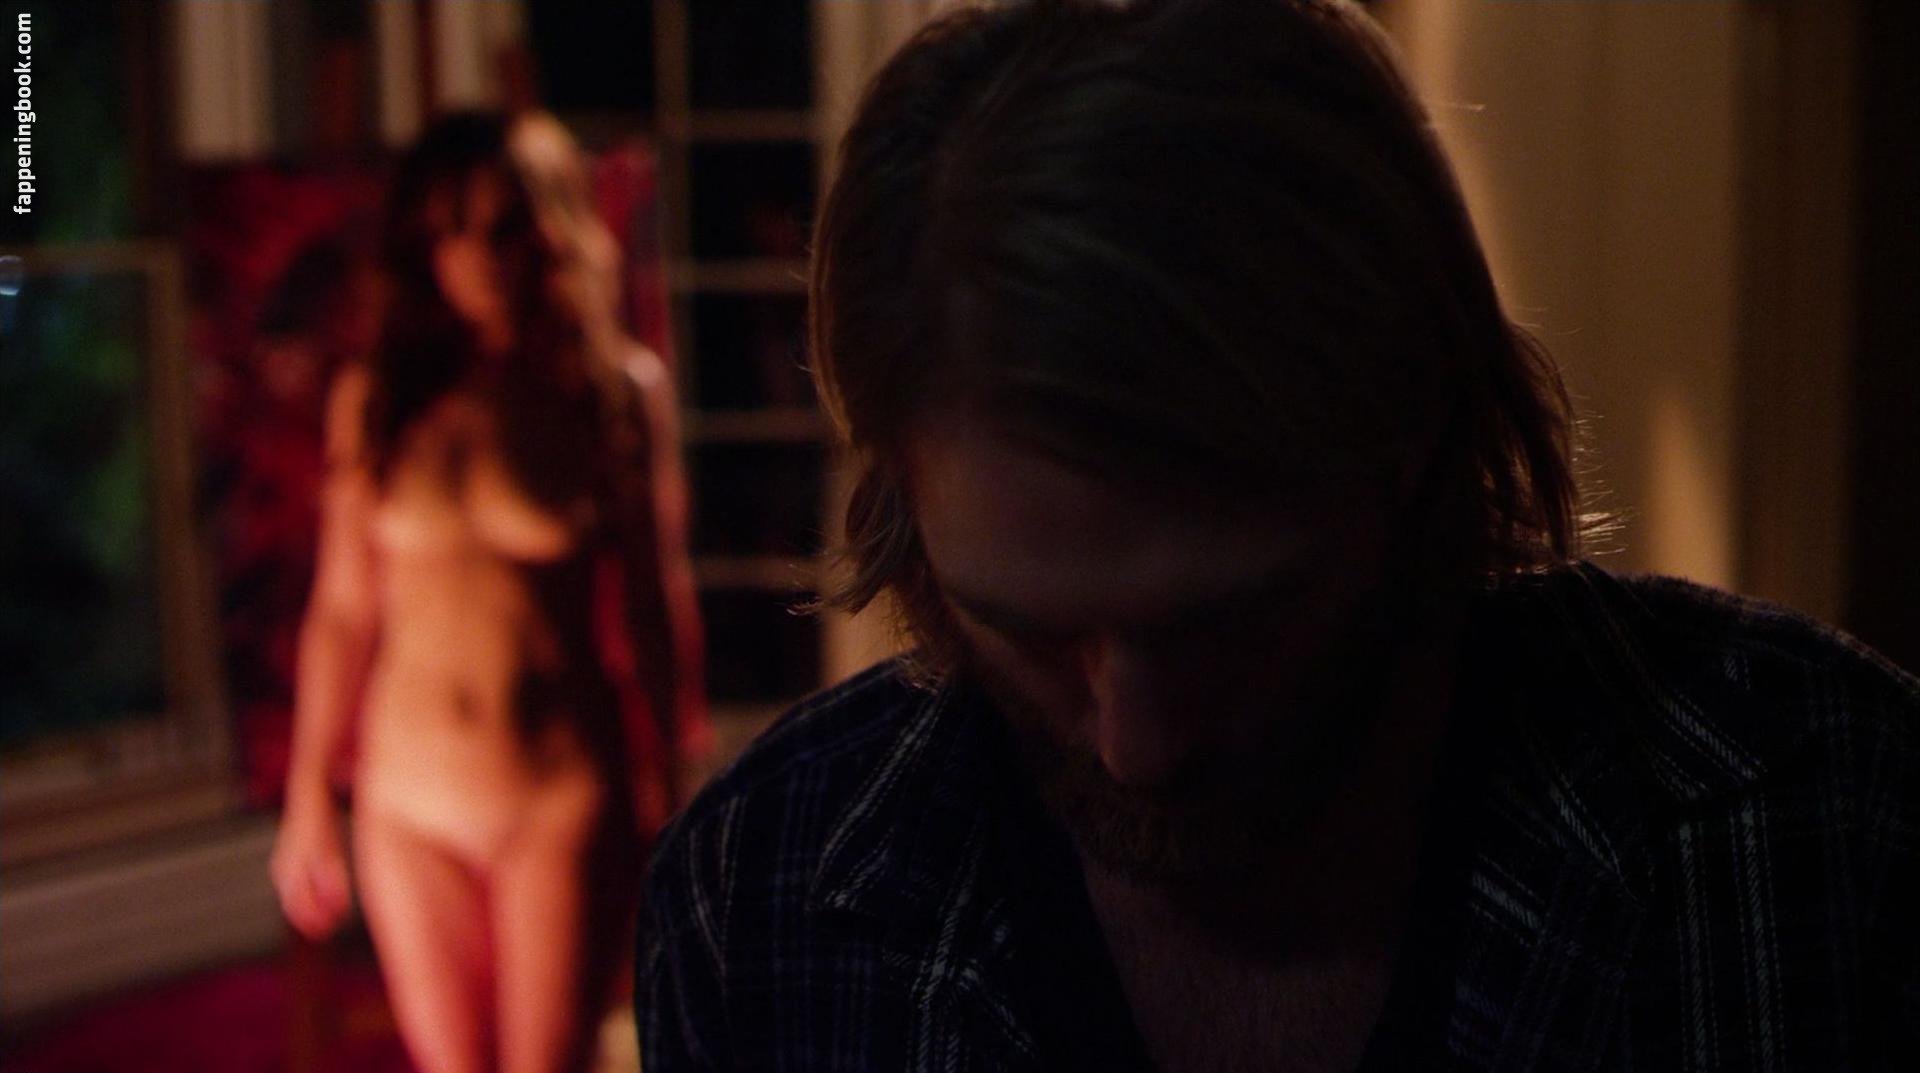 Nude Roles in Movies: The Amityville Terror (2016) .